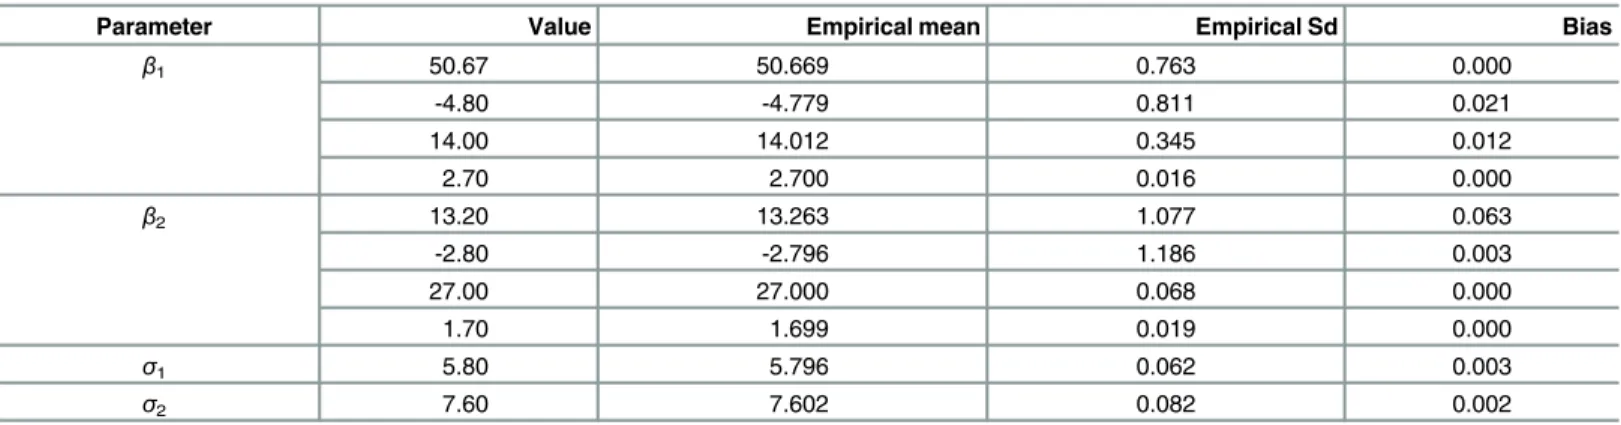 Table 2. Comparative table of true values of parameters and estimates based on 1000 replications using true values of parameters.